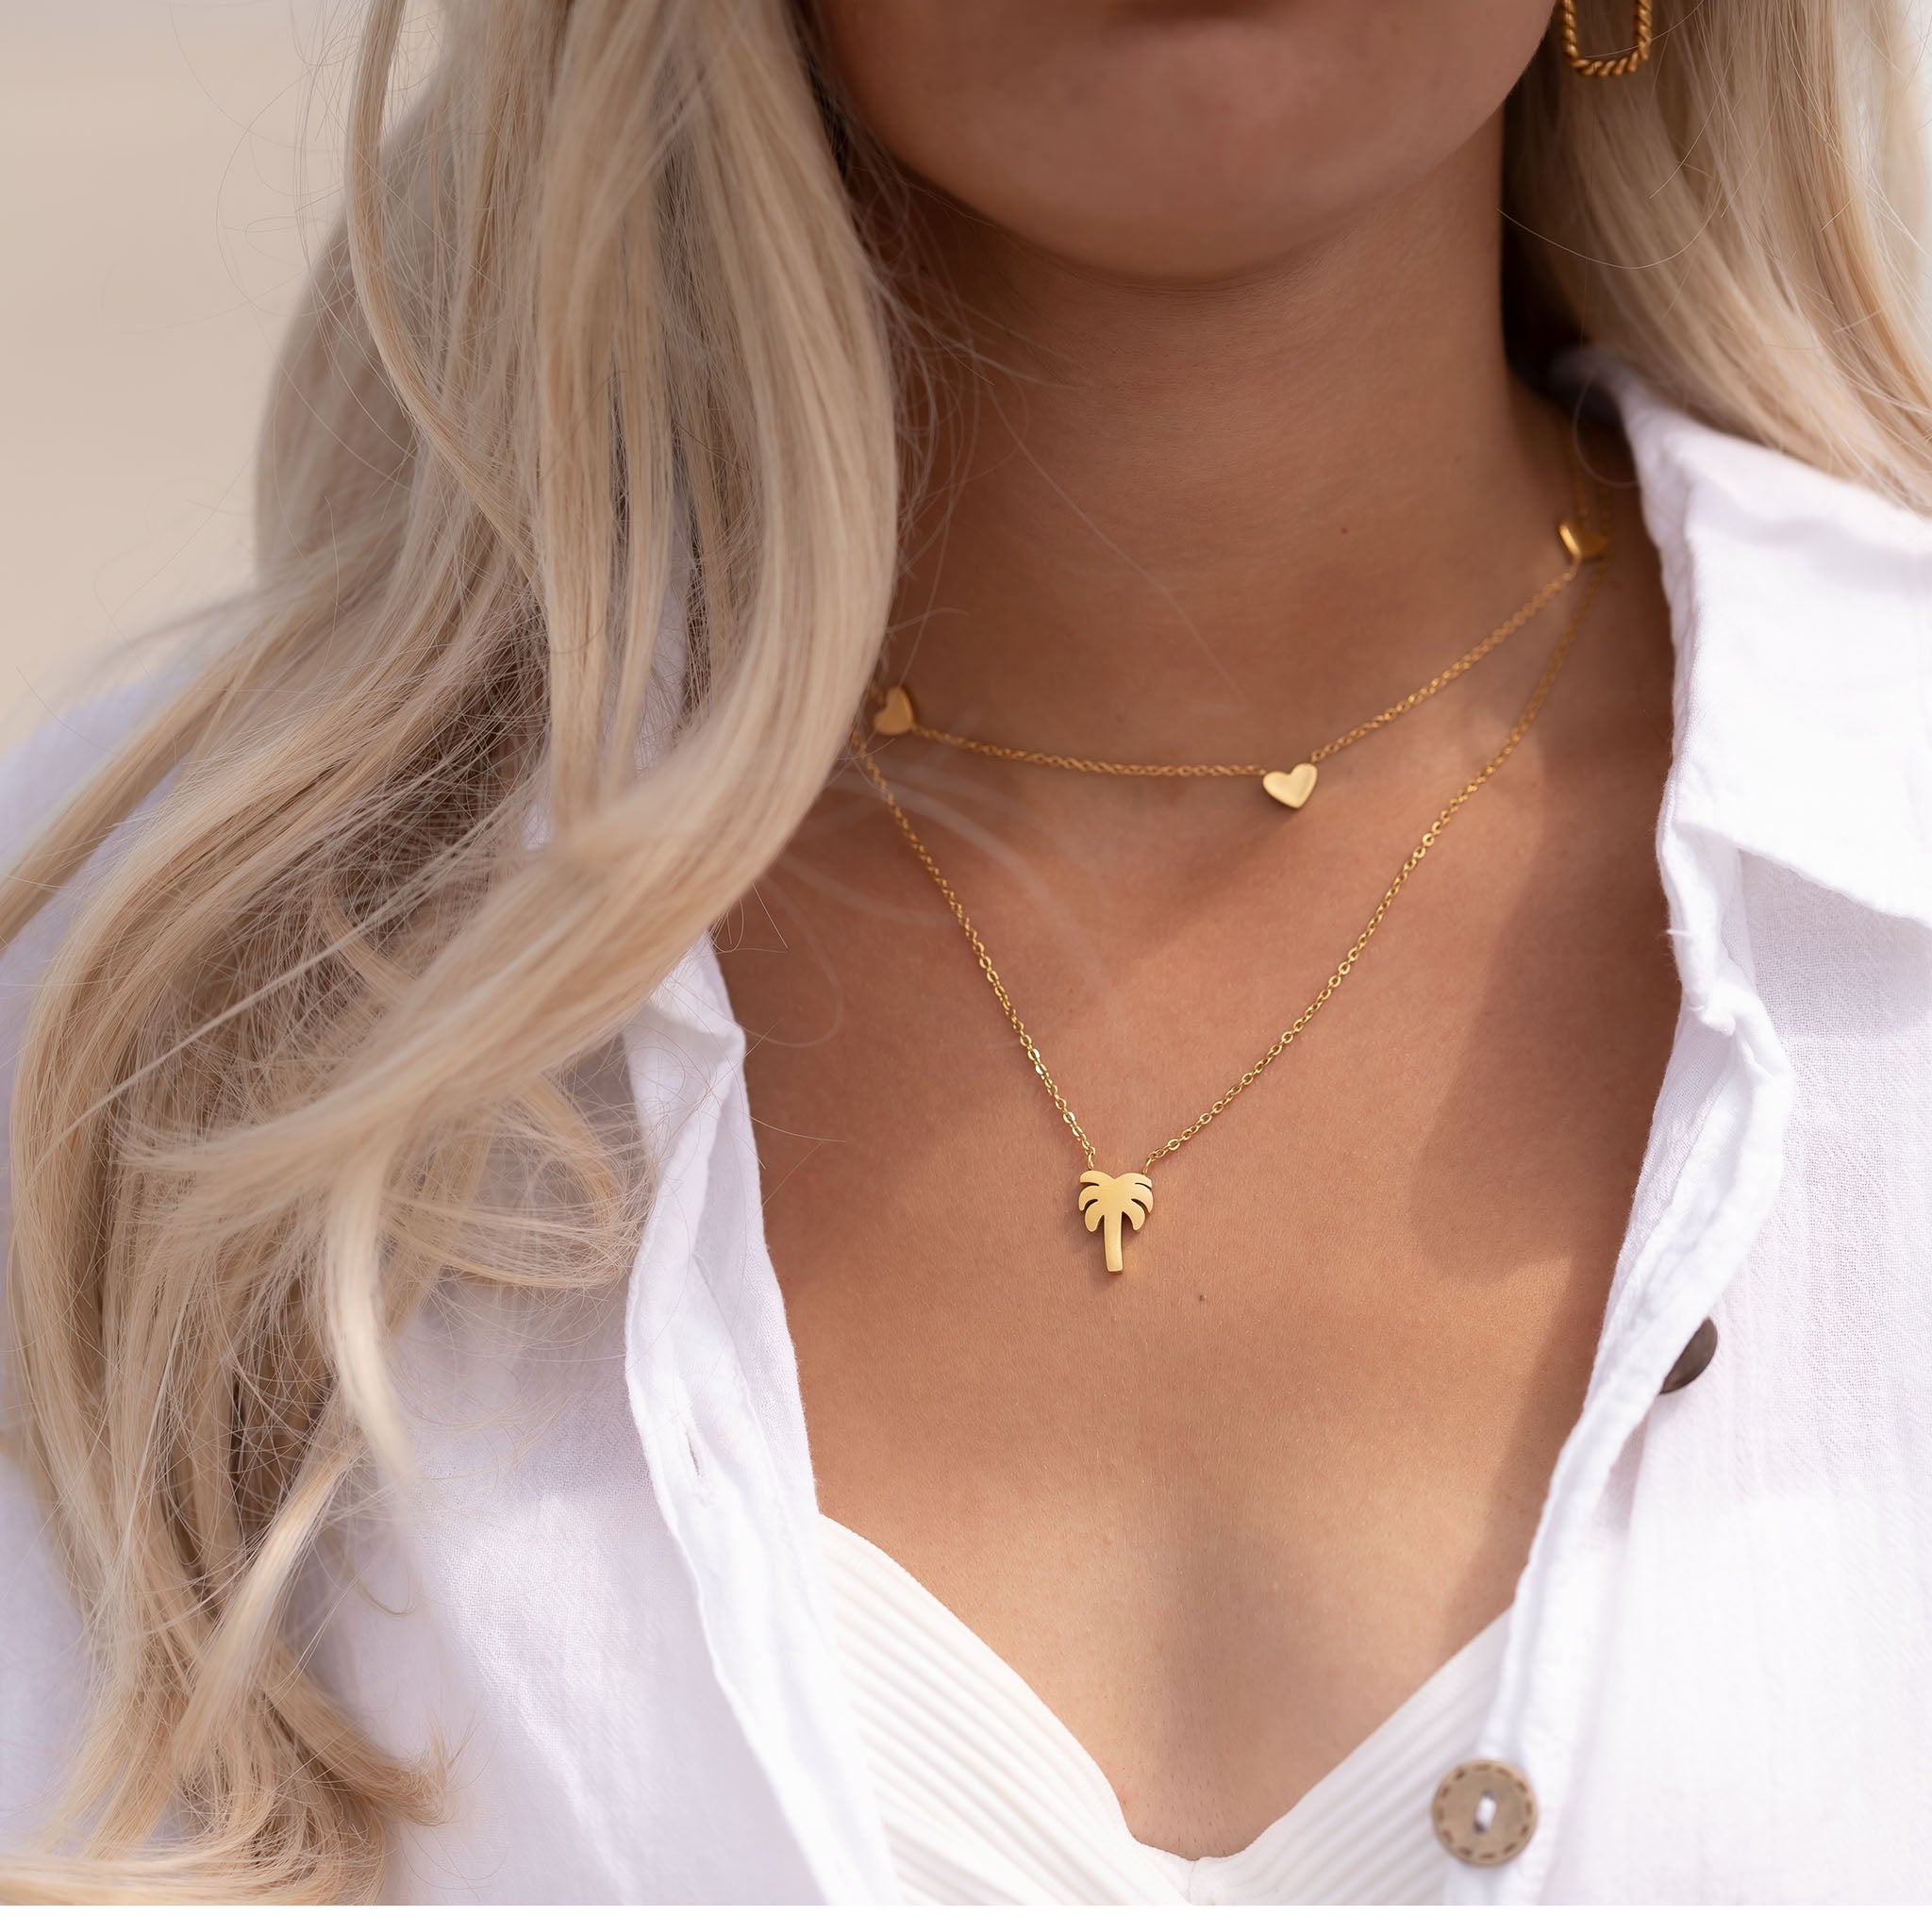 Palm tree necklace gold